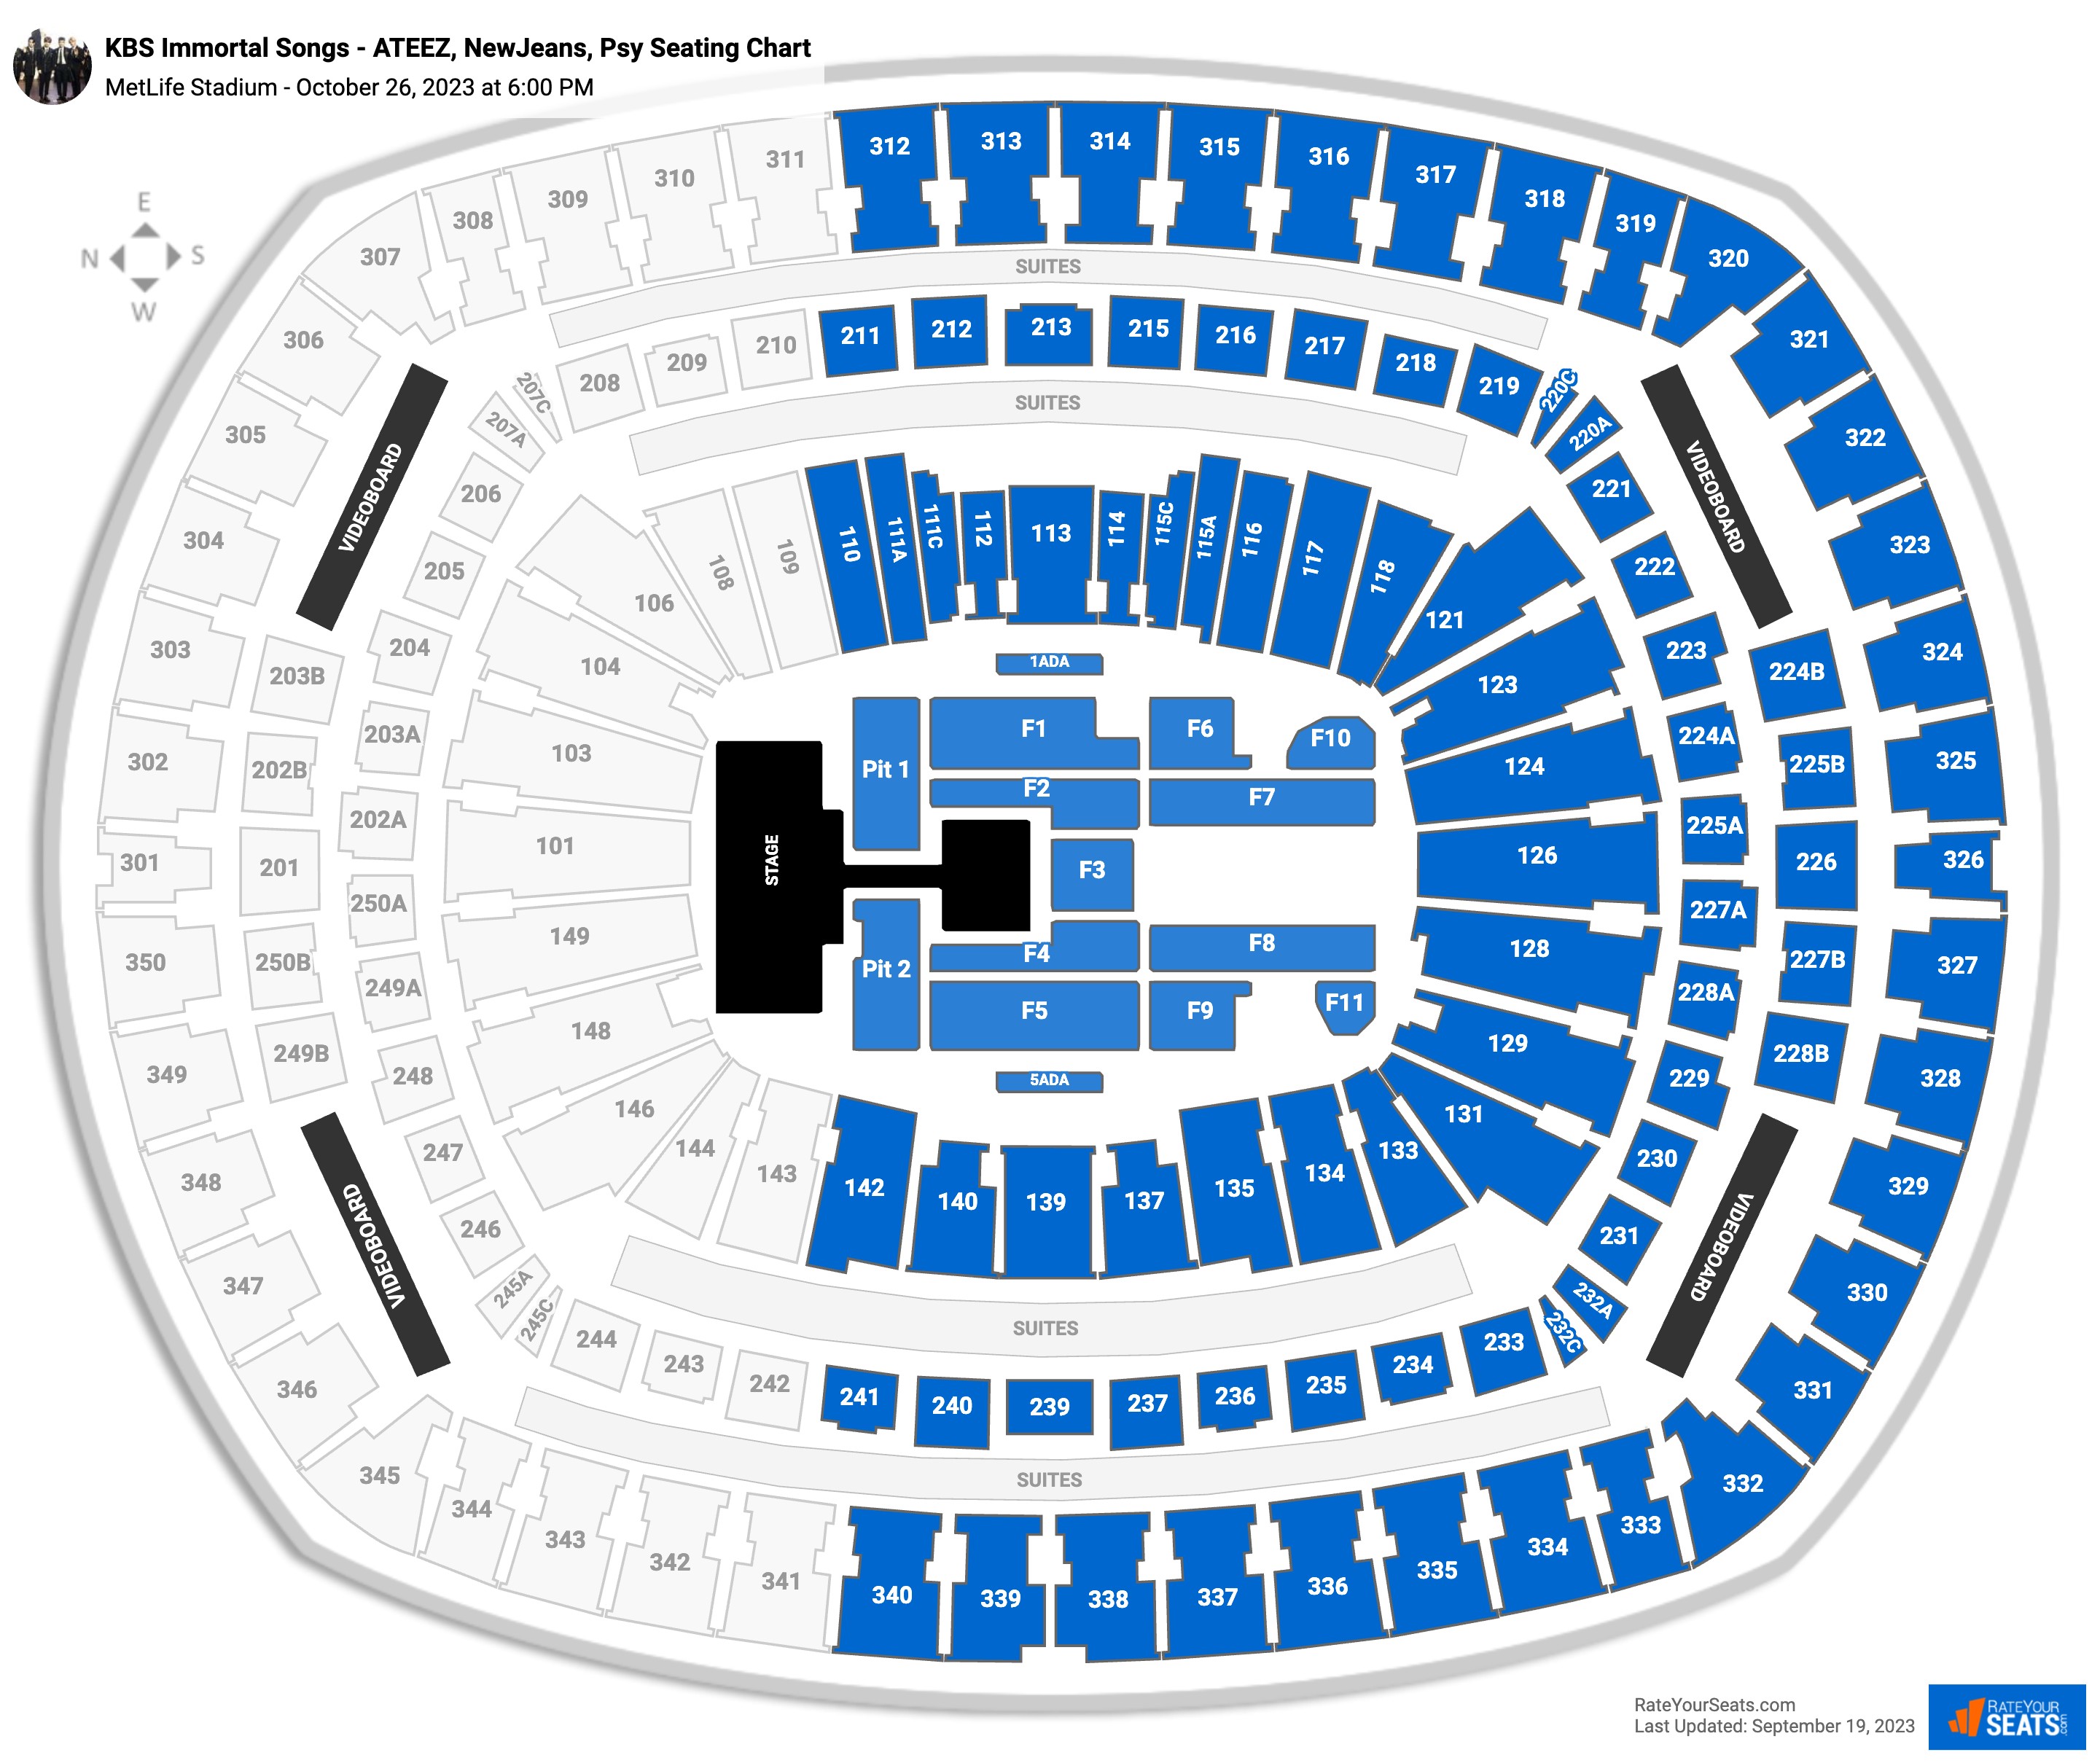 MetLife Stadium - East Rutherford, NJ  Tickets, 2023-2024 Event Schedule,  Seating Chart